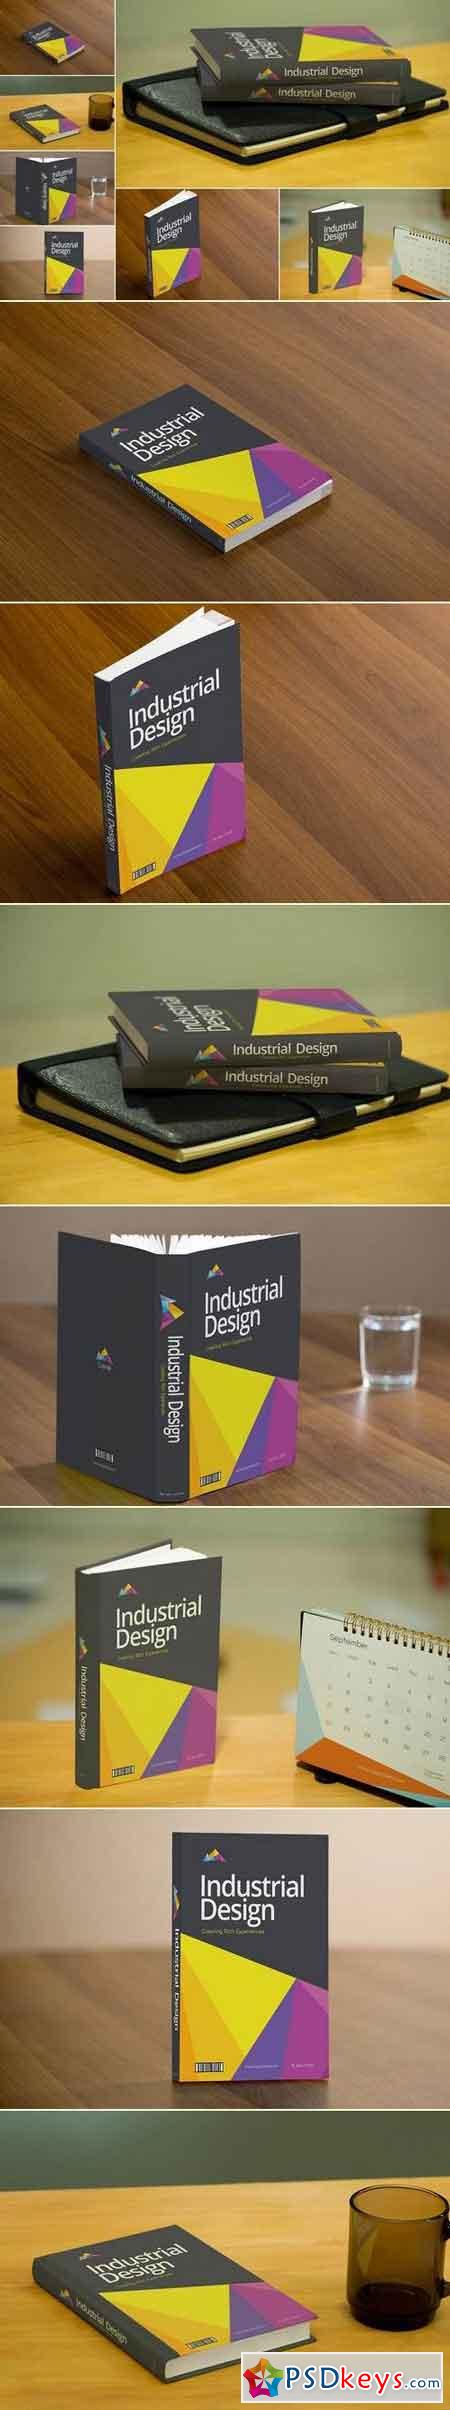 Realistic Book Cover Mockups